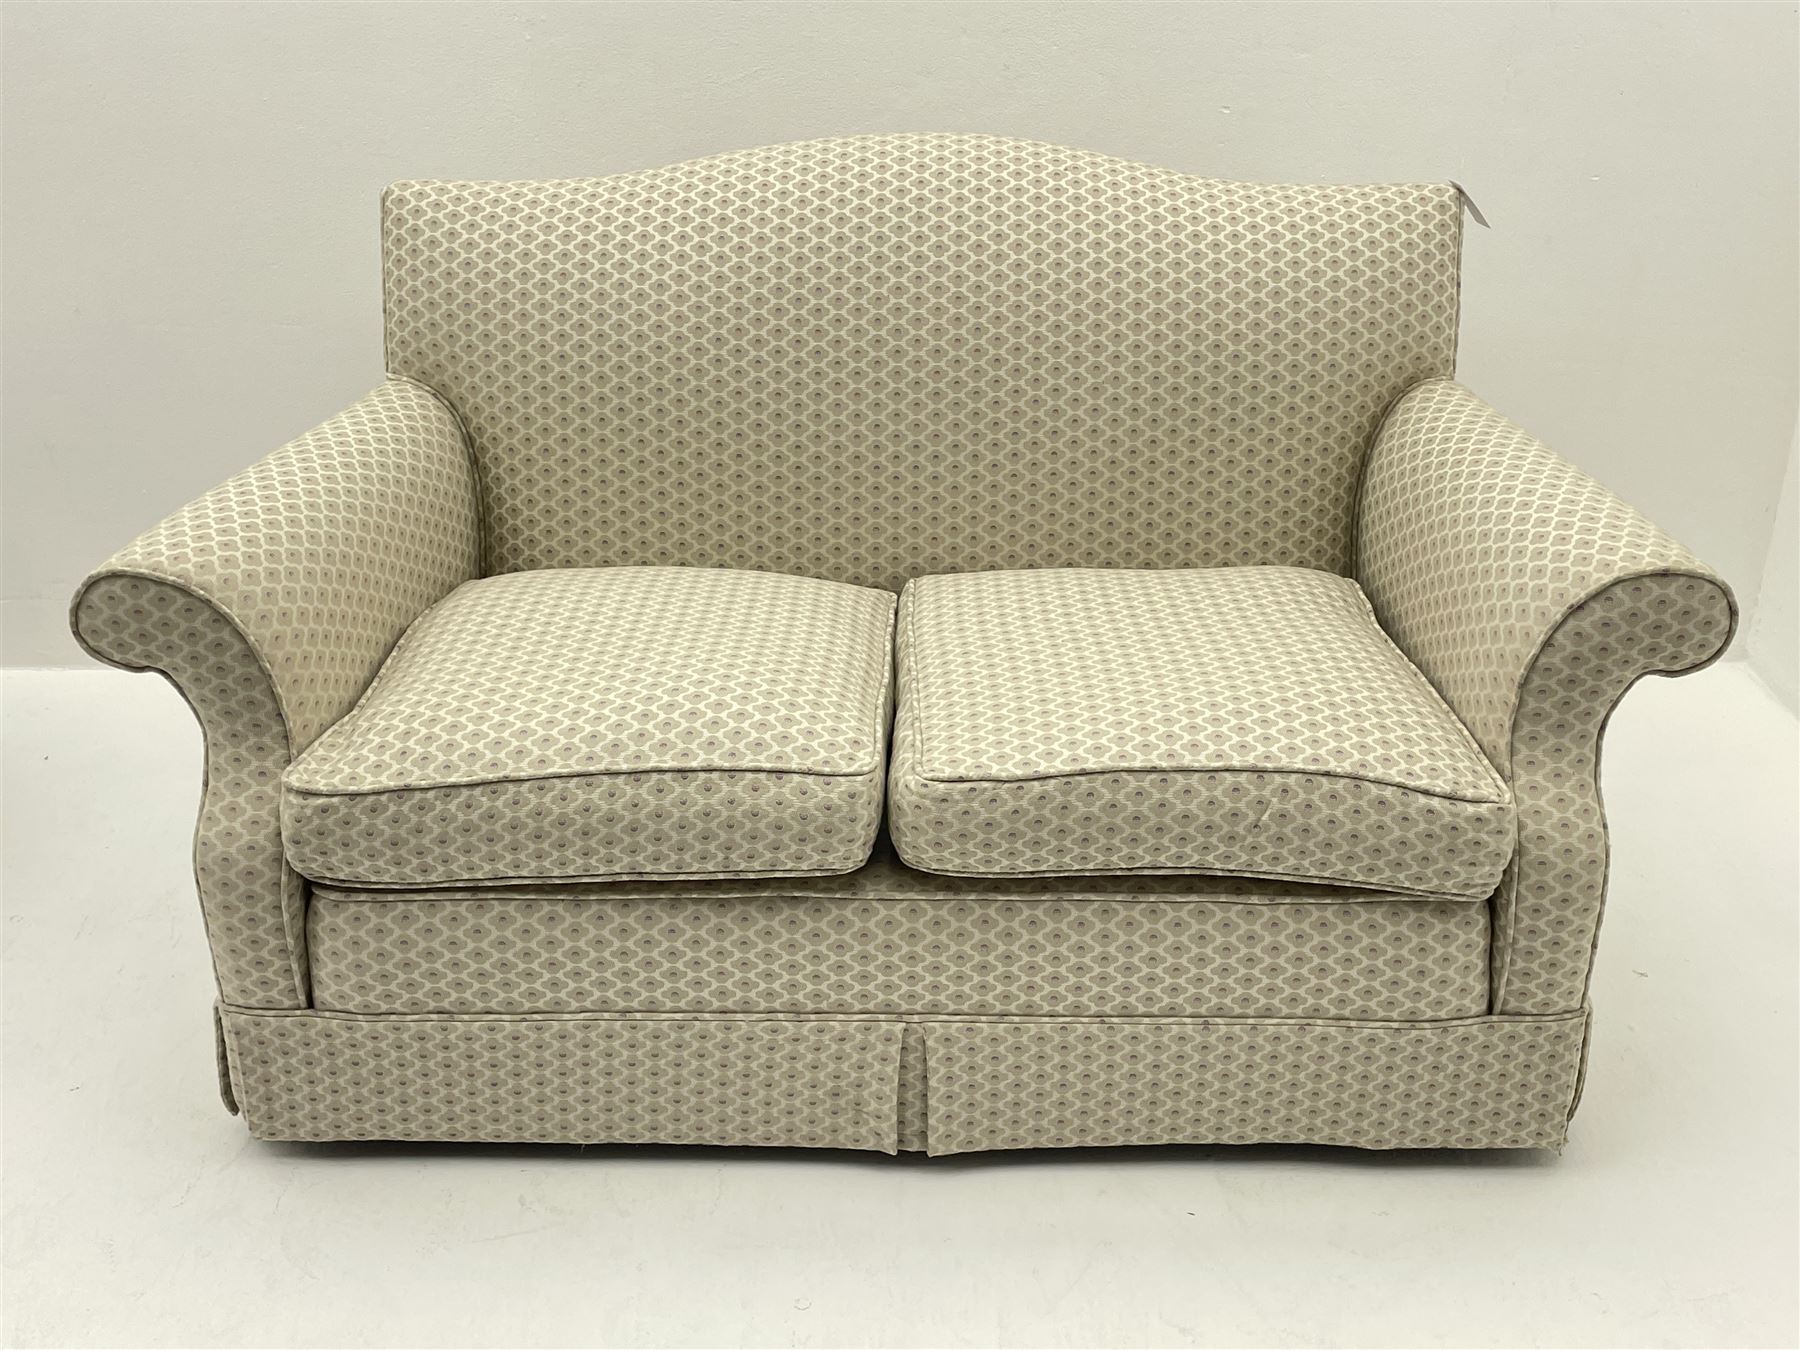 Quality traditional two seat sofa with feather cushions - Image 3 of 5